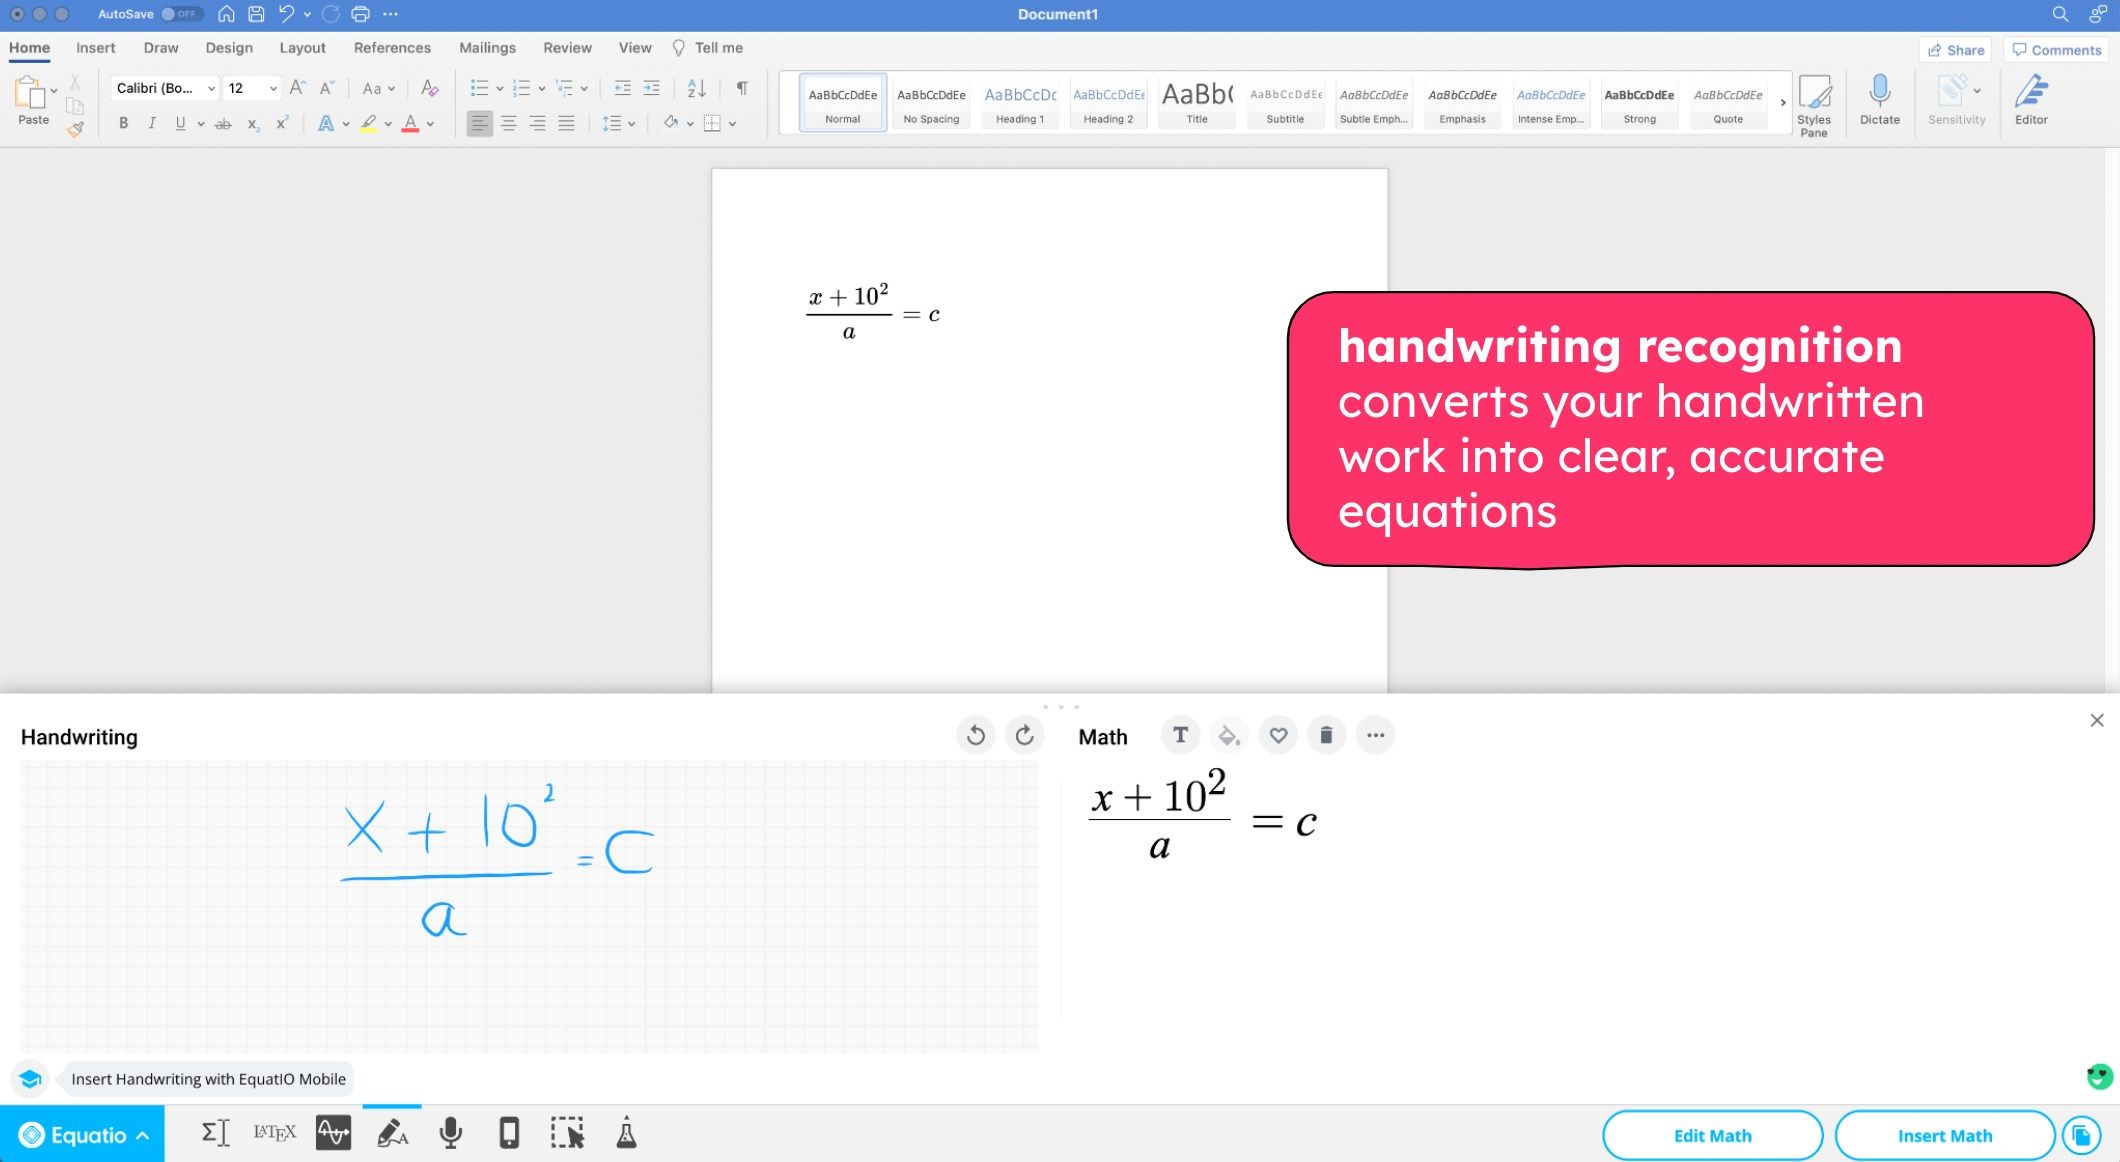 handwriting recognition converts your handwritten work into clear, accurate equations